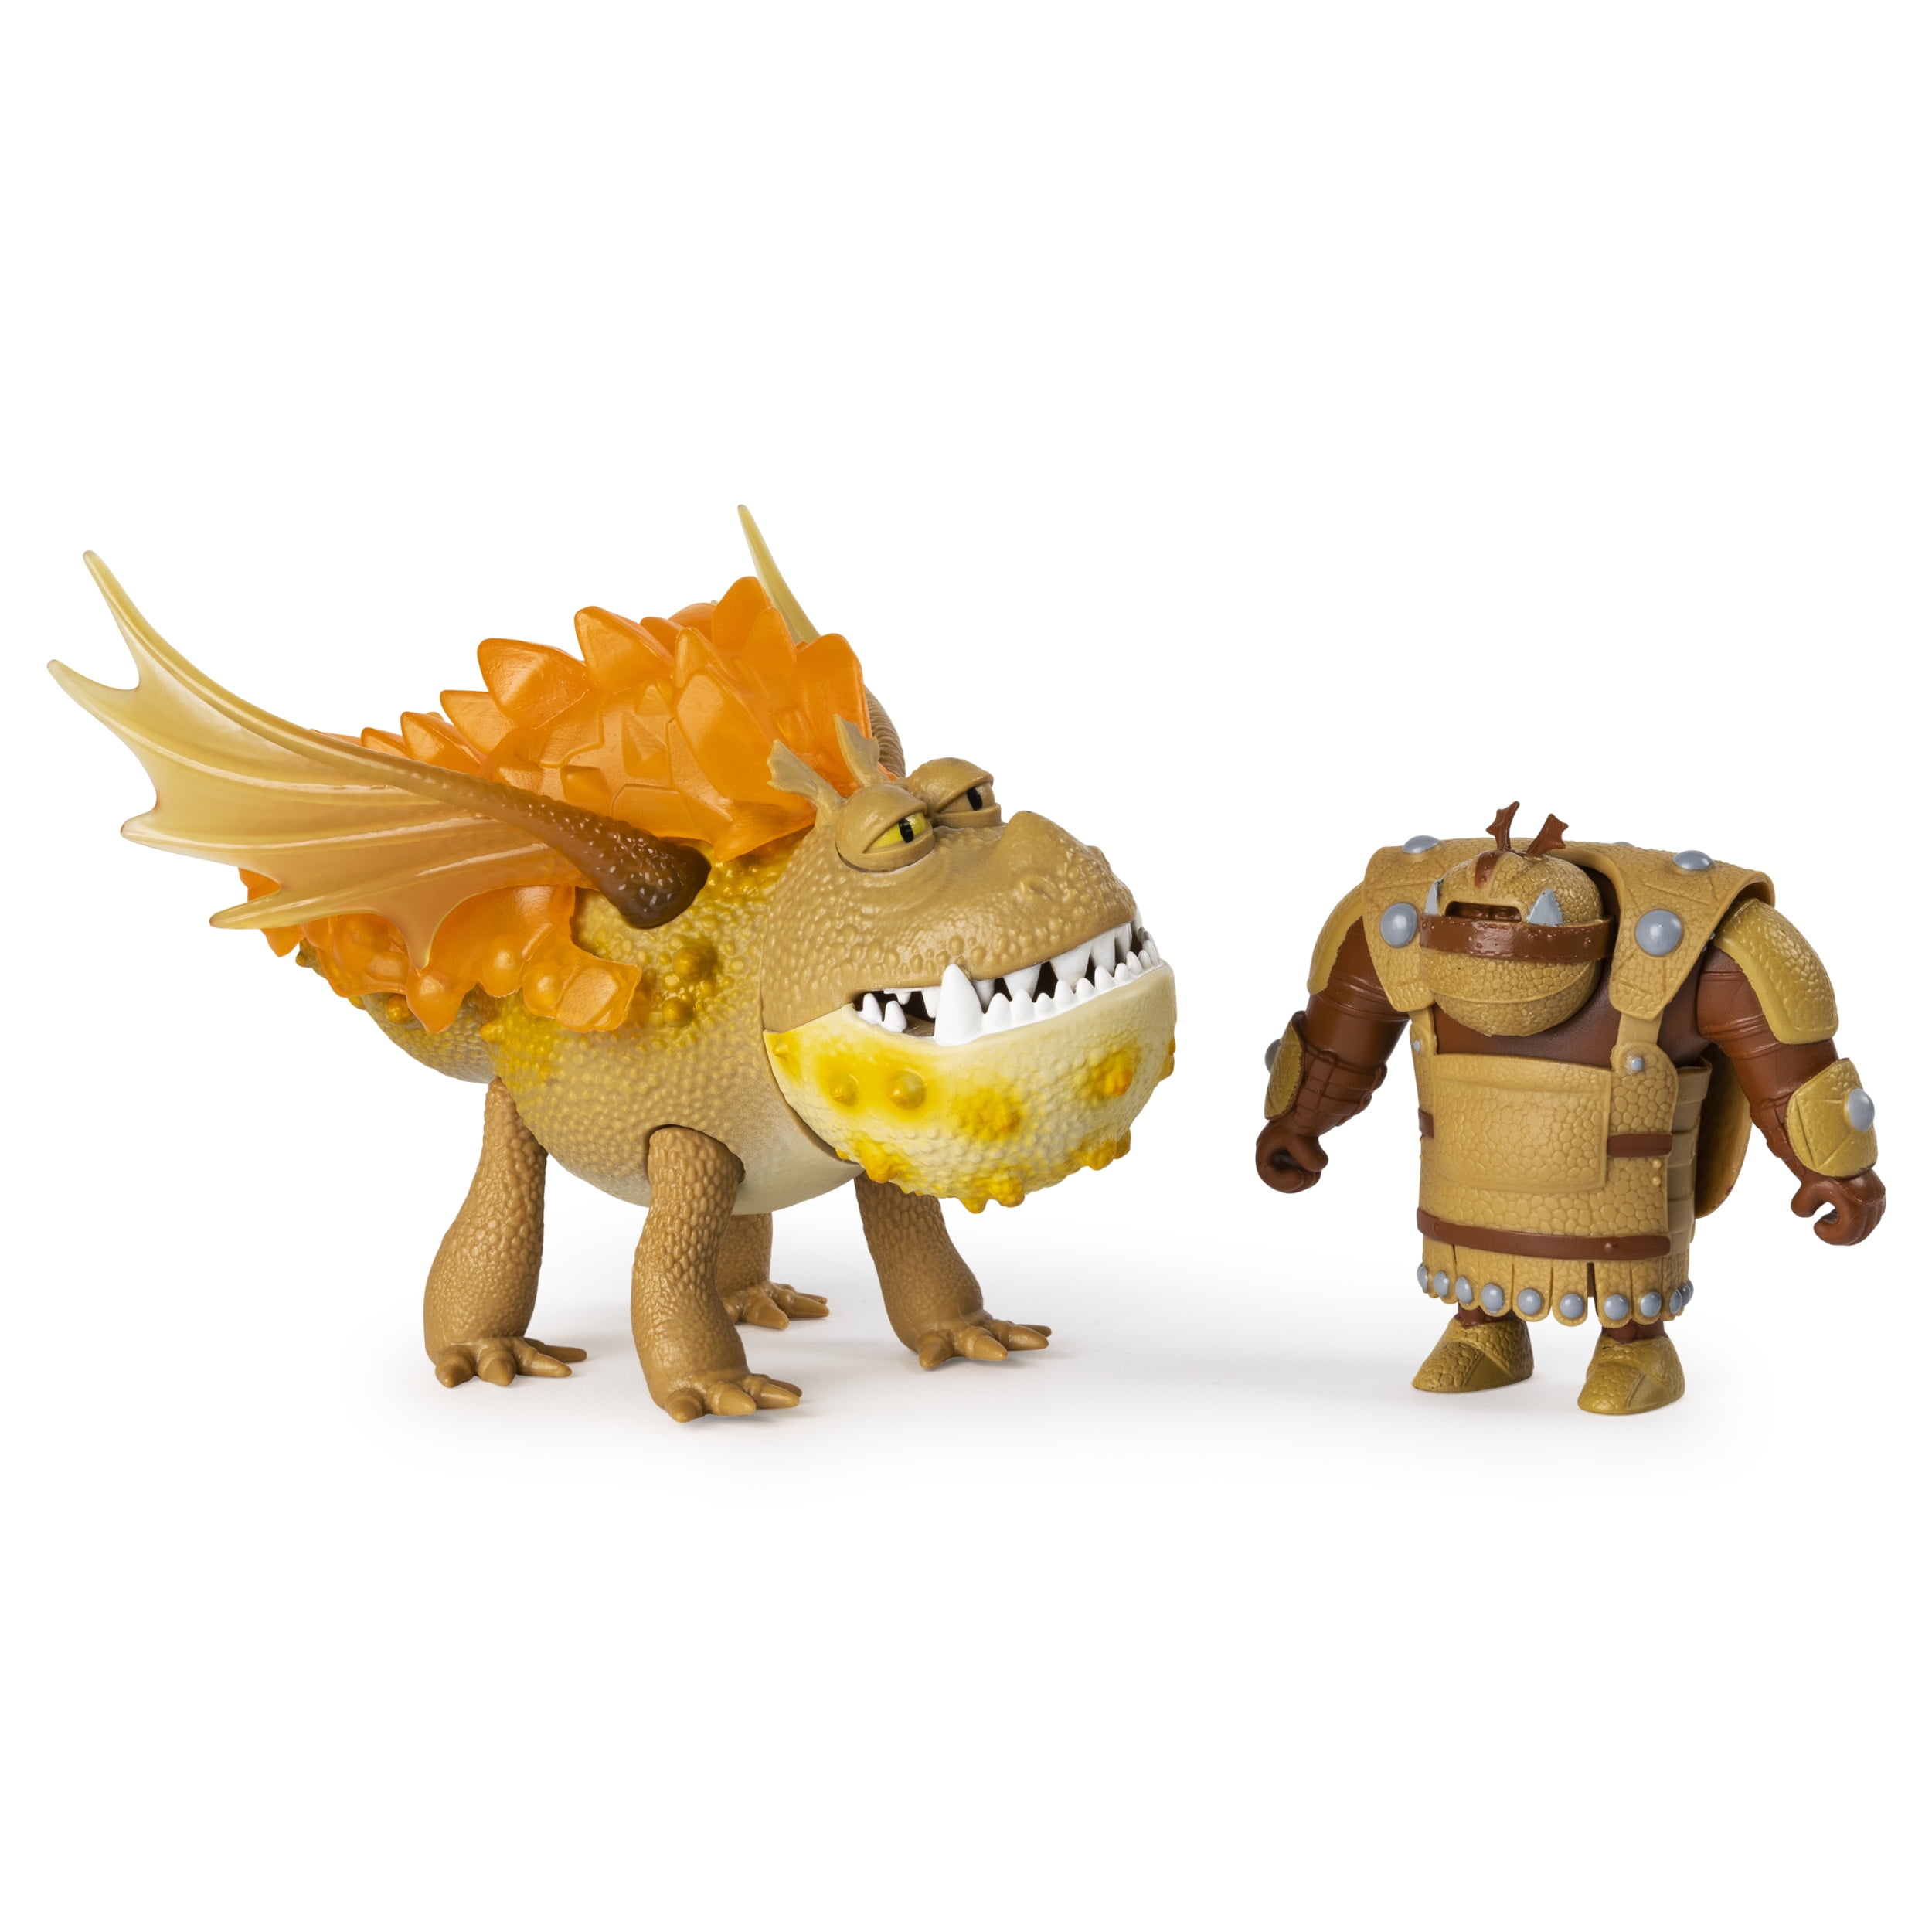 How to Train Your Dragon The Hidden World Fishlegs and Meatlug Dreamworks Figure for sale online 